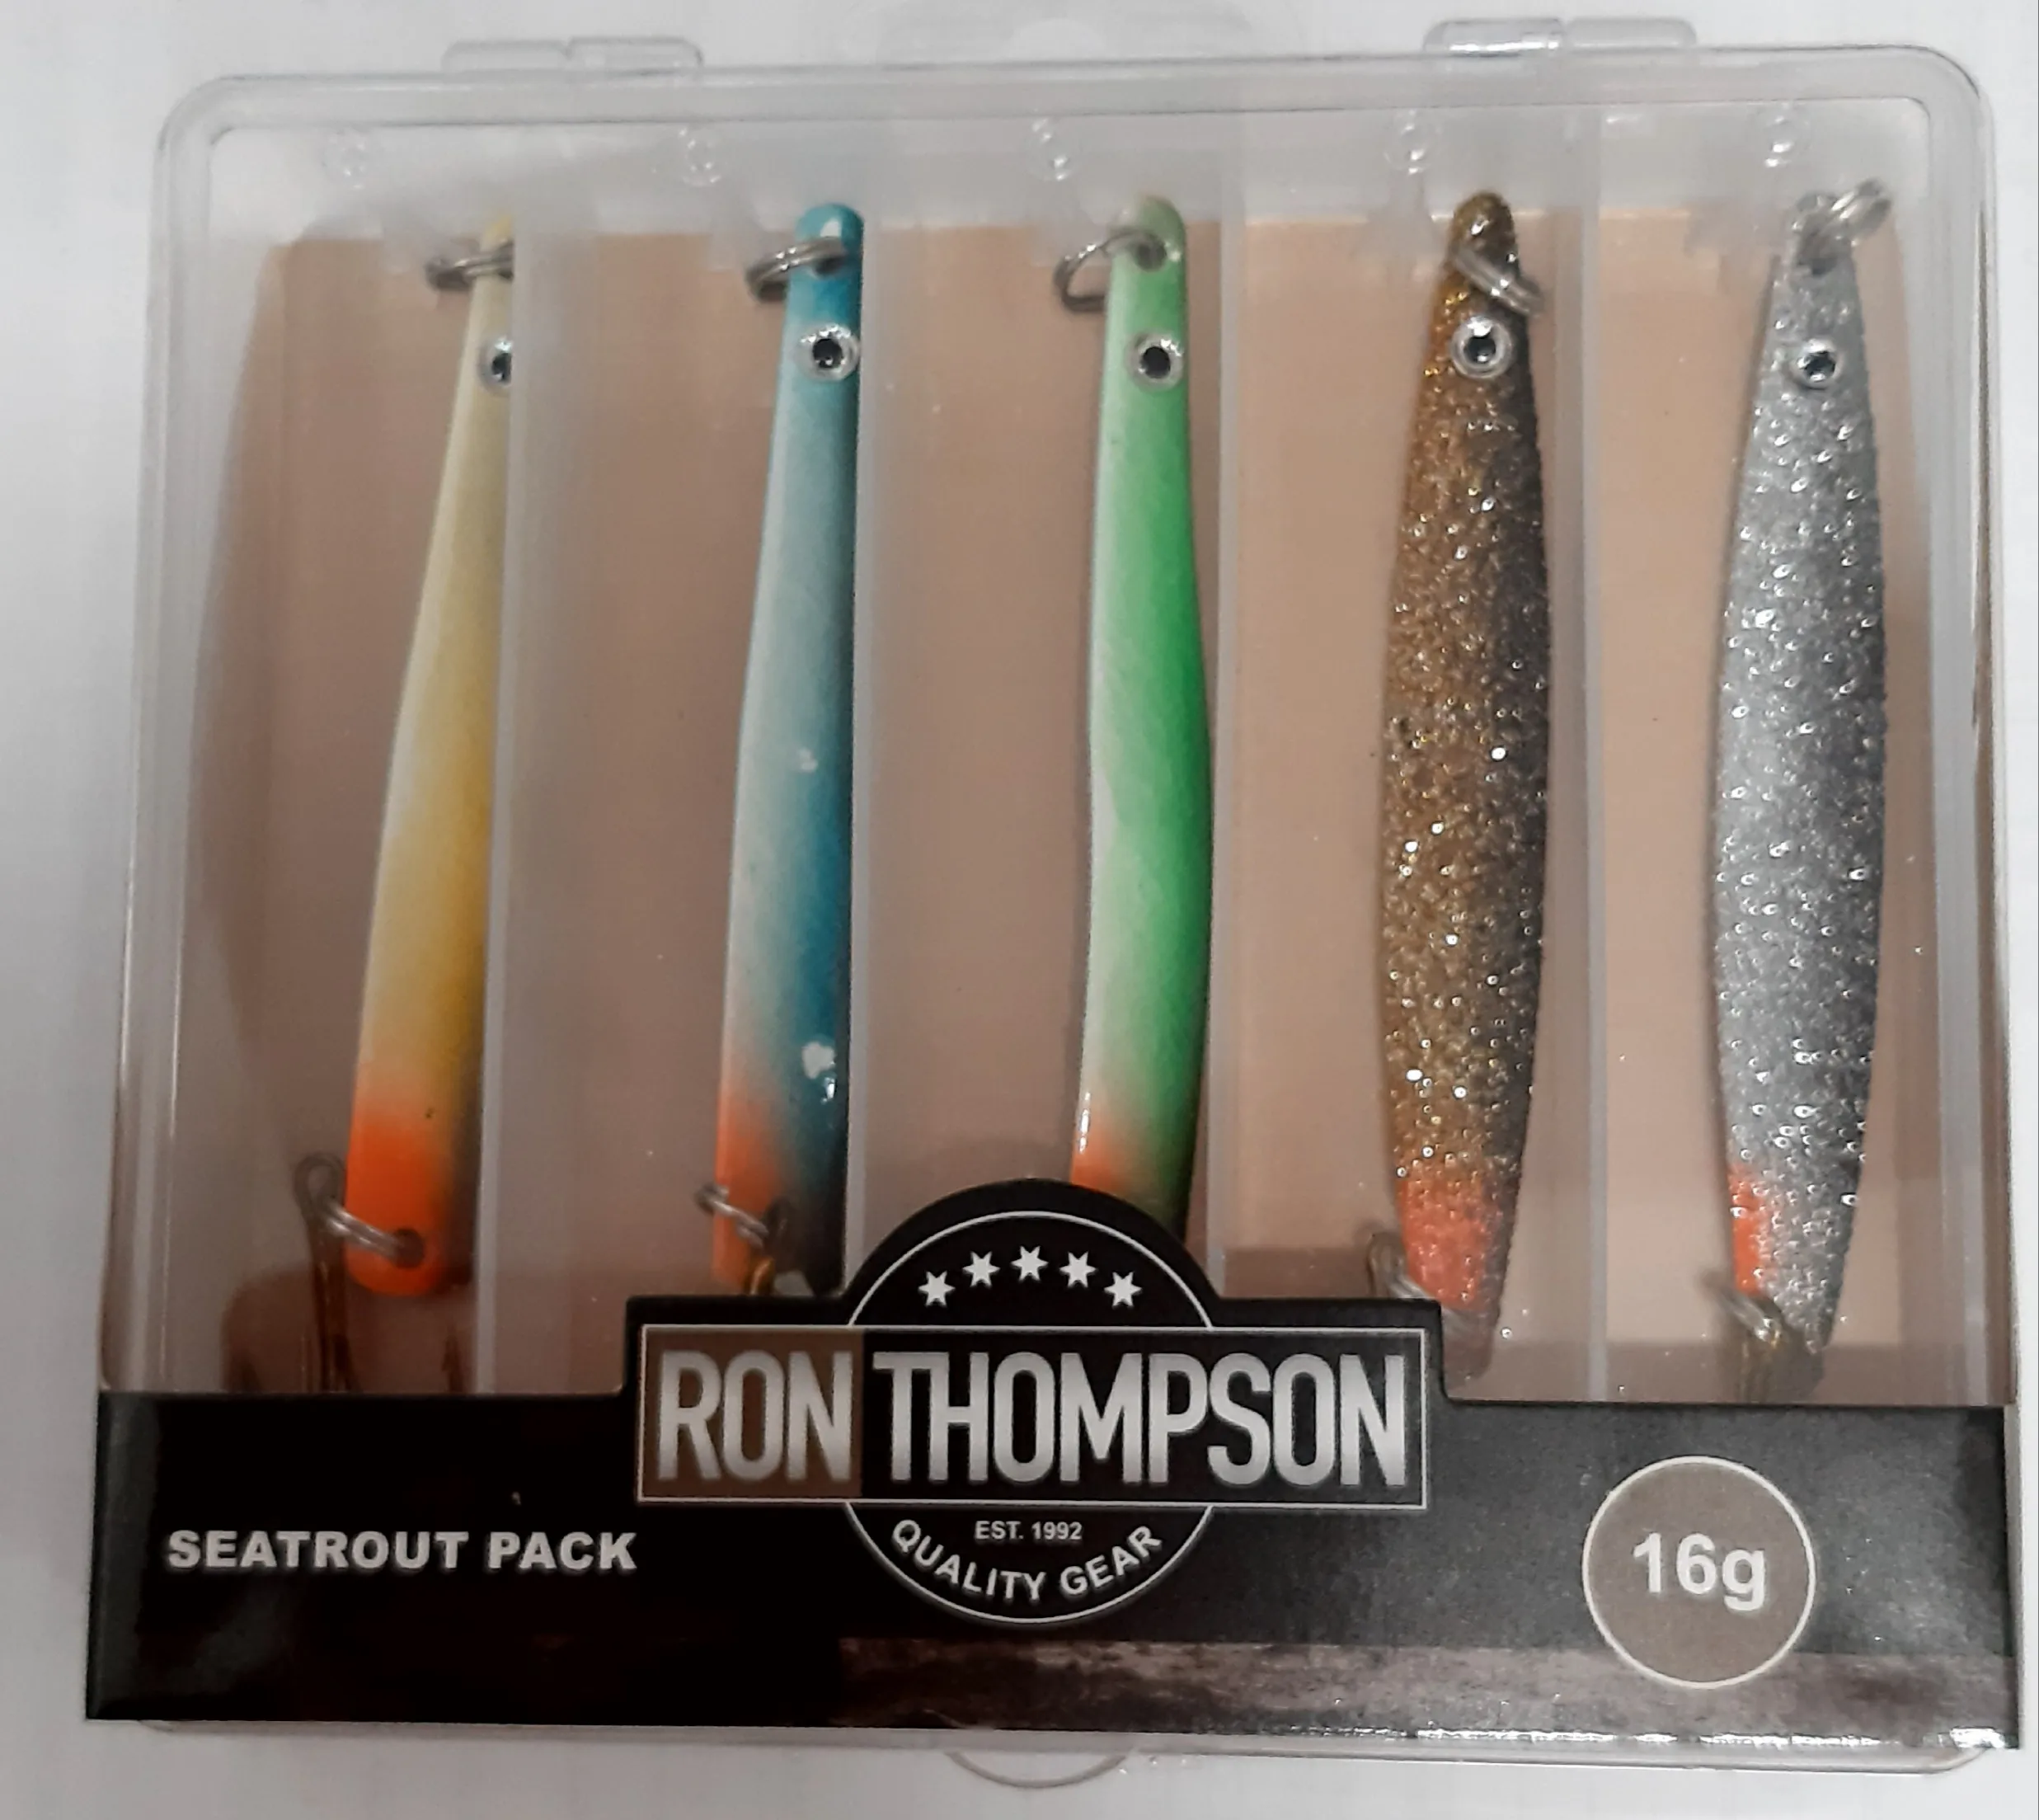 Ron Thompson Seatrout Lure Pack